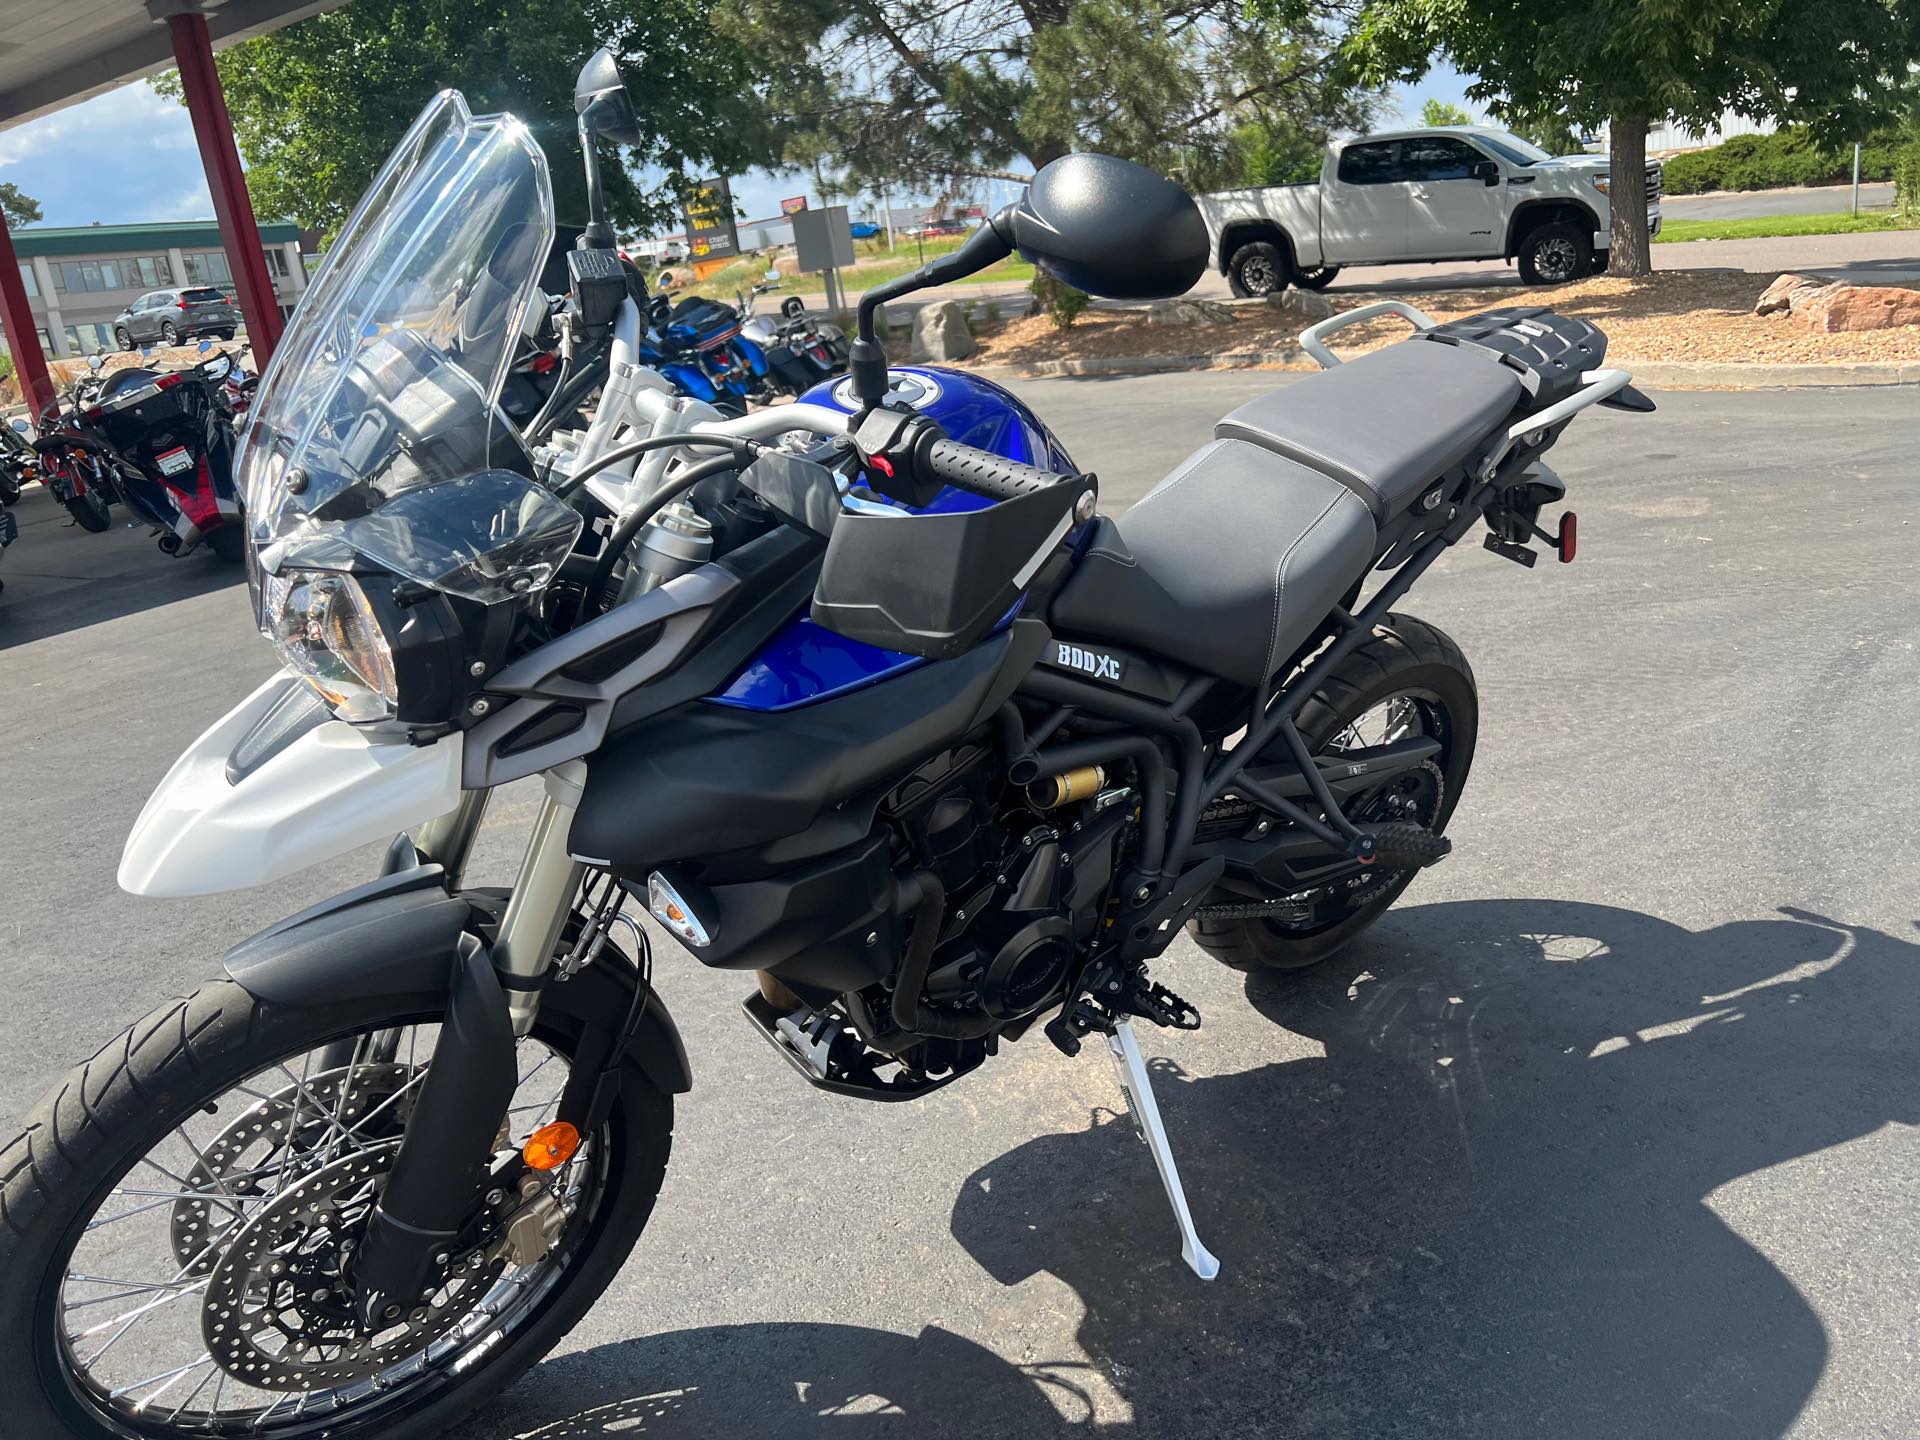 2014 TRIUMPH TIGER 800 XC at Aces Motorcycles - Fort Collins